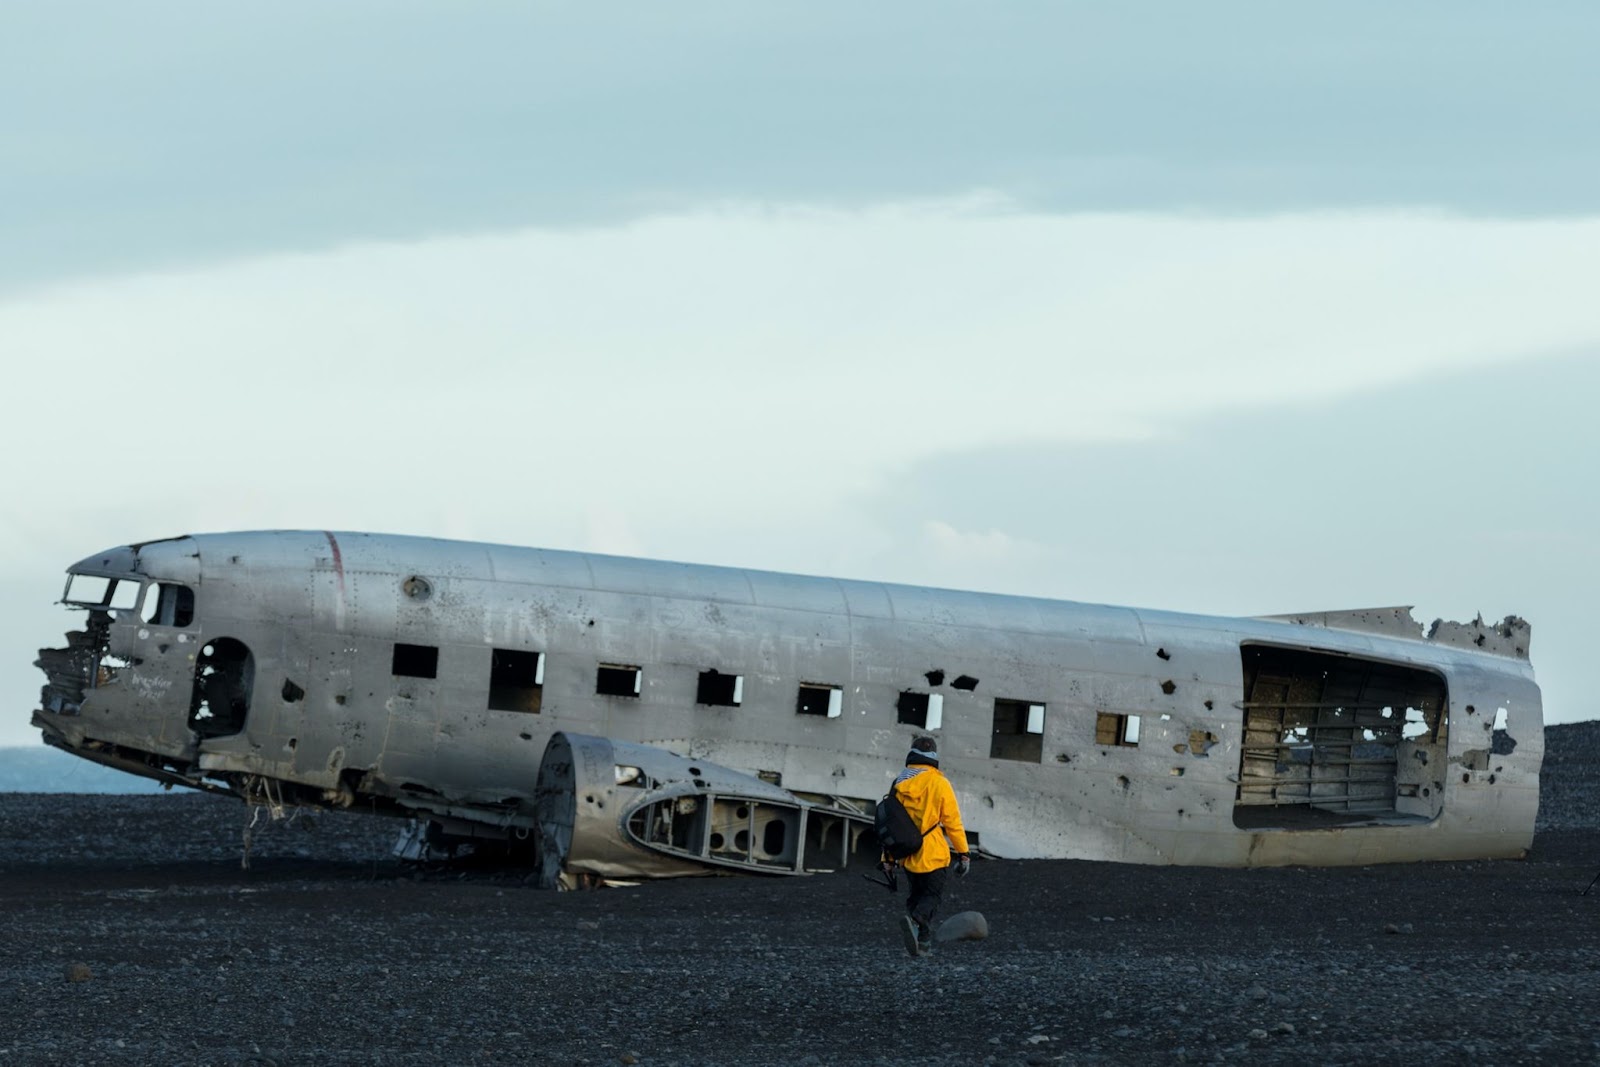 The aircraft wreck in iceland